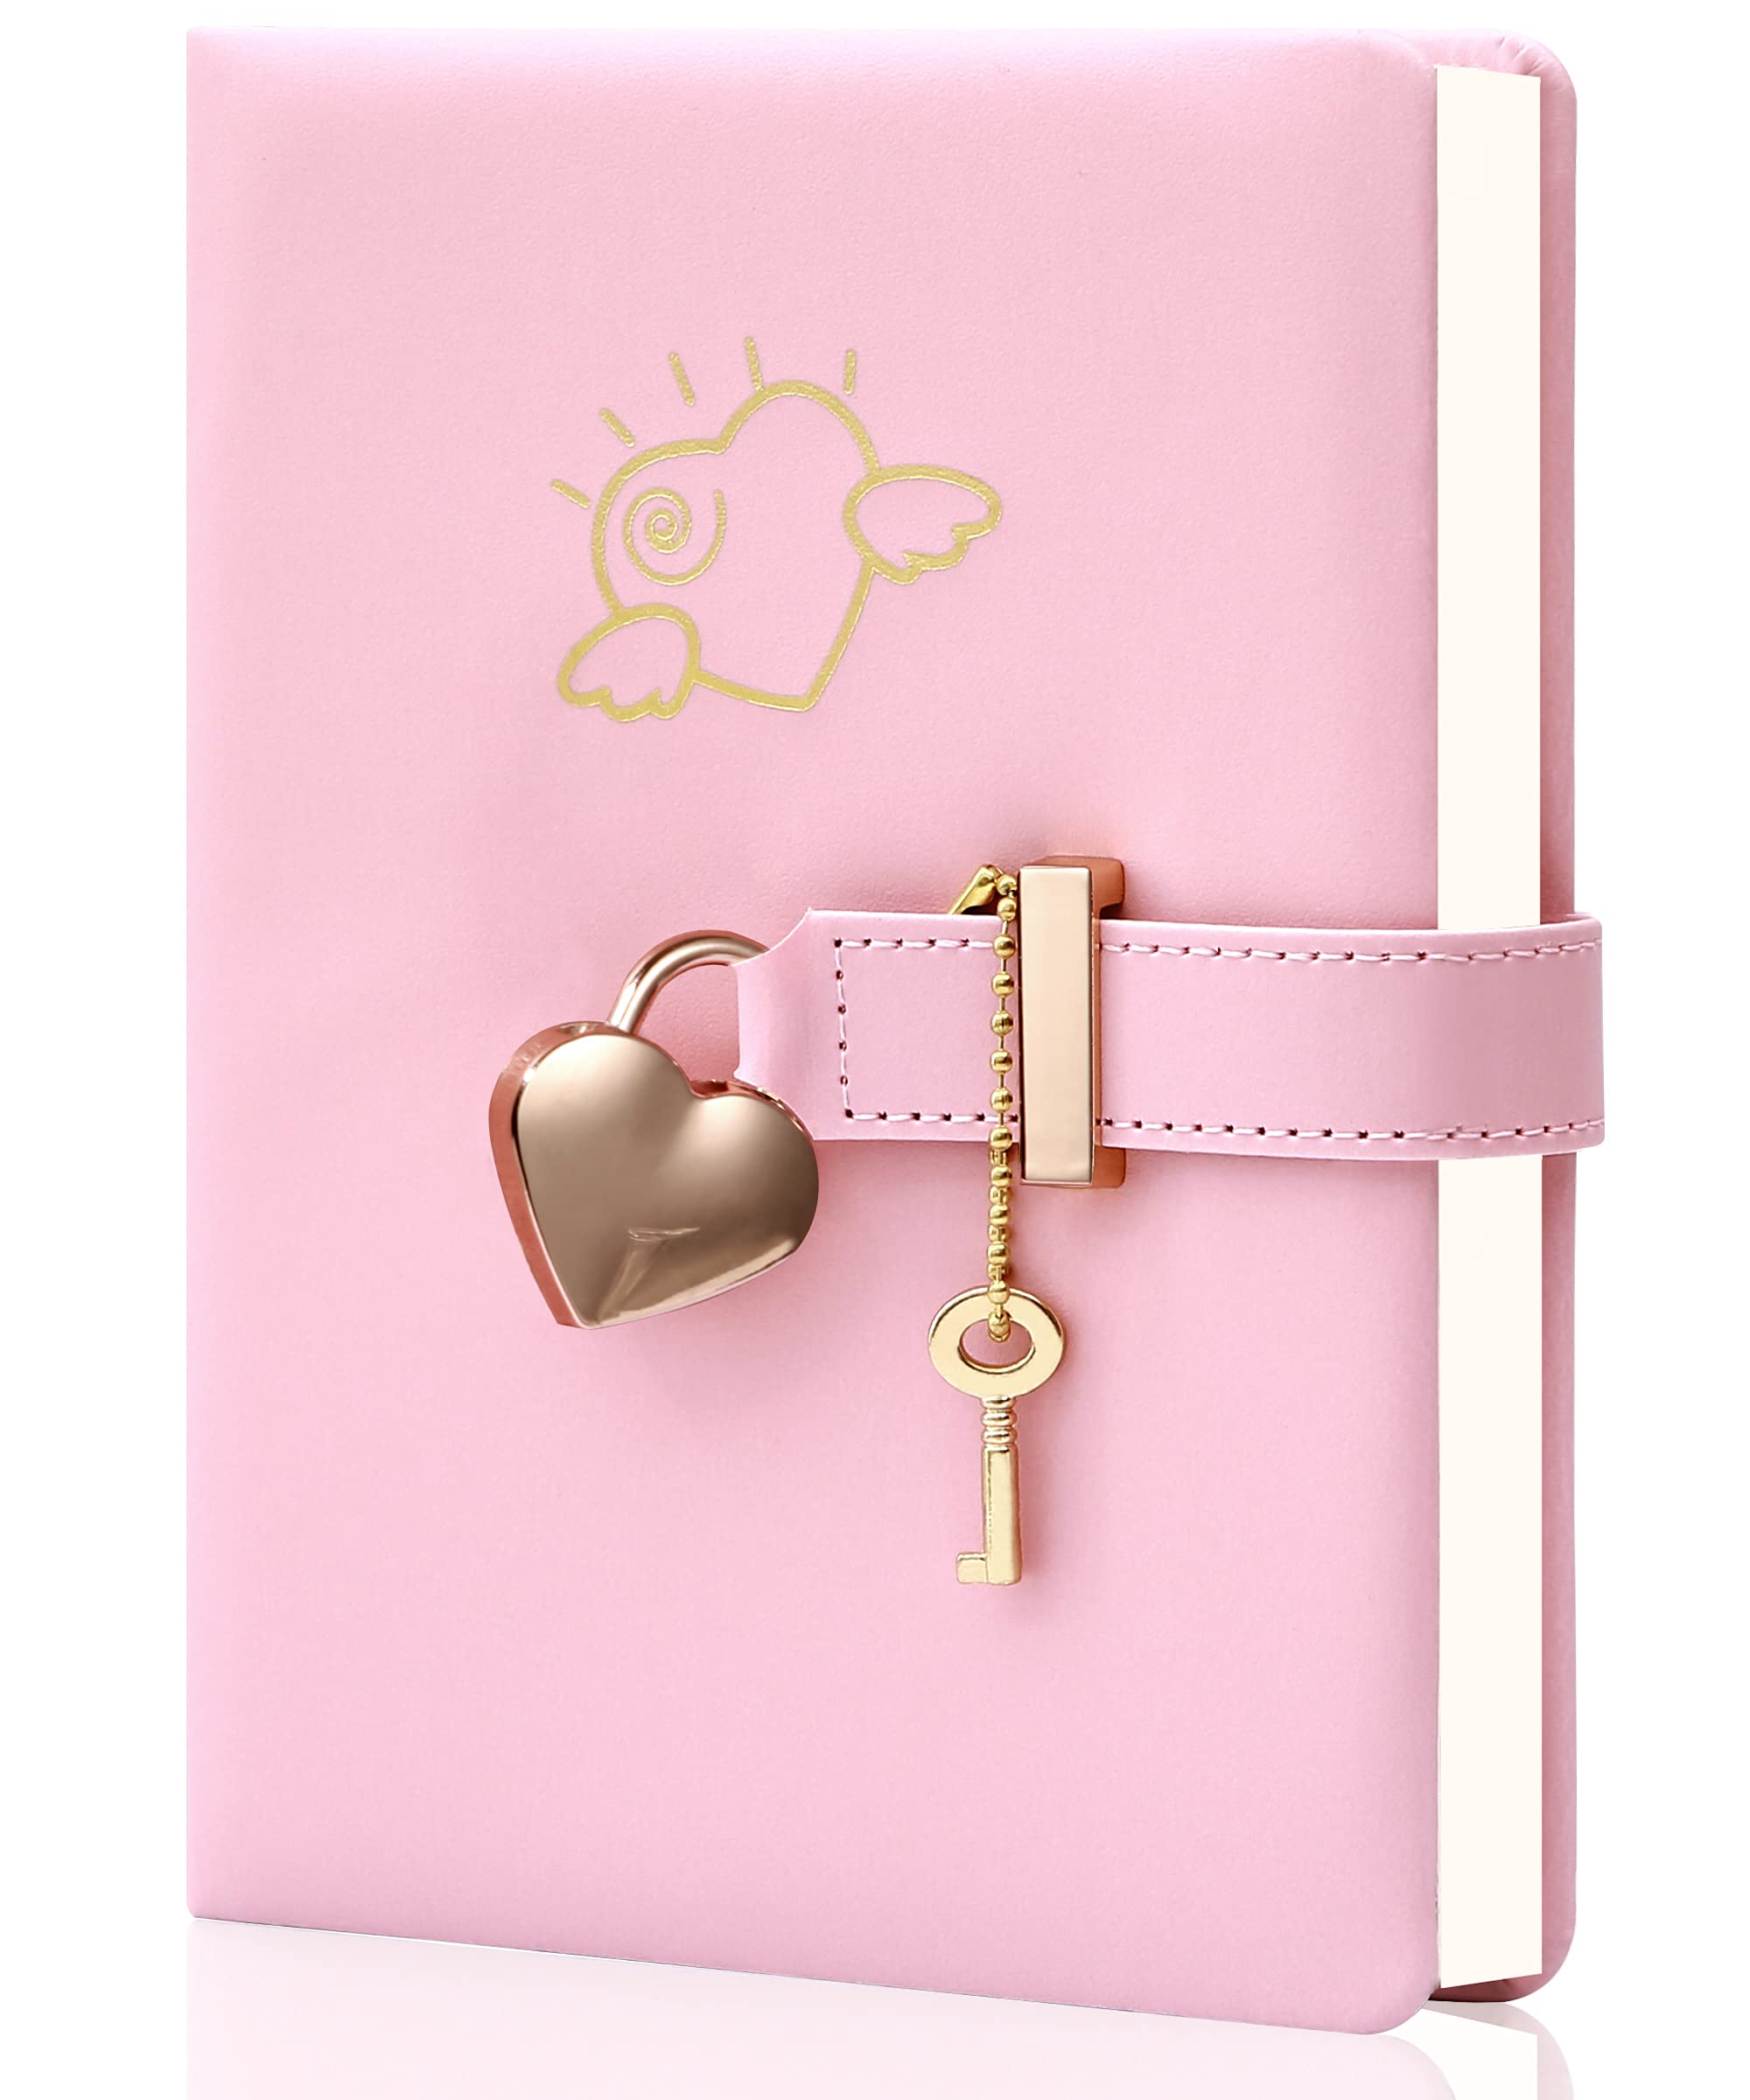 cagie Diary With Lock And Key Pu Leather Kids Journal With Lock Personal Organizer Combination Travel Secret Notebook For Women, 53X7